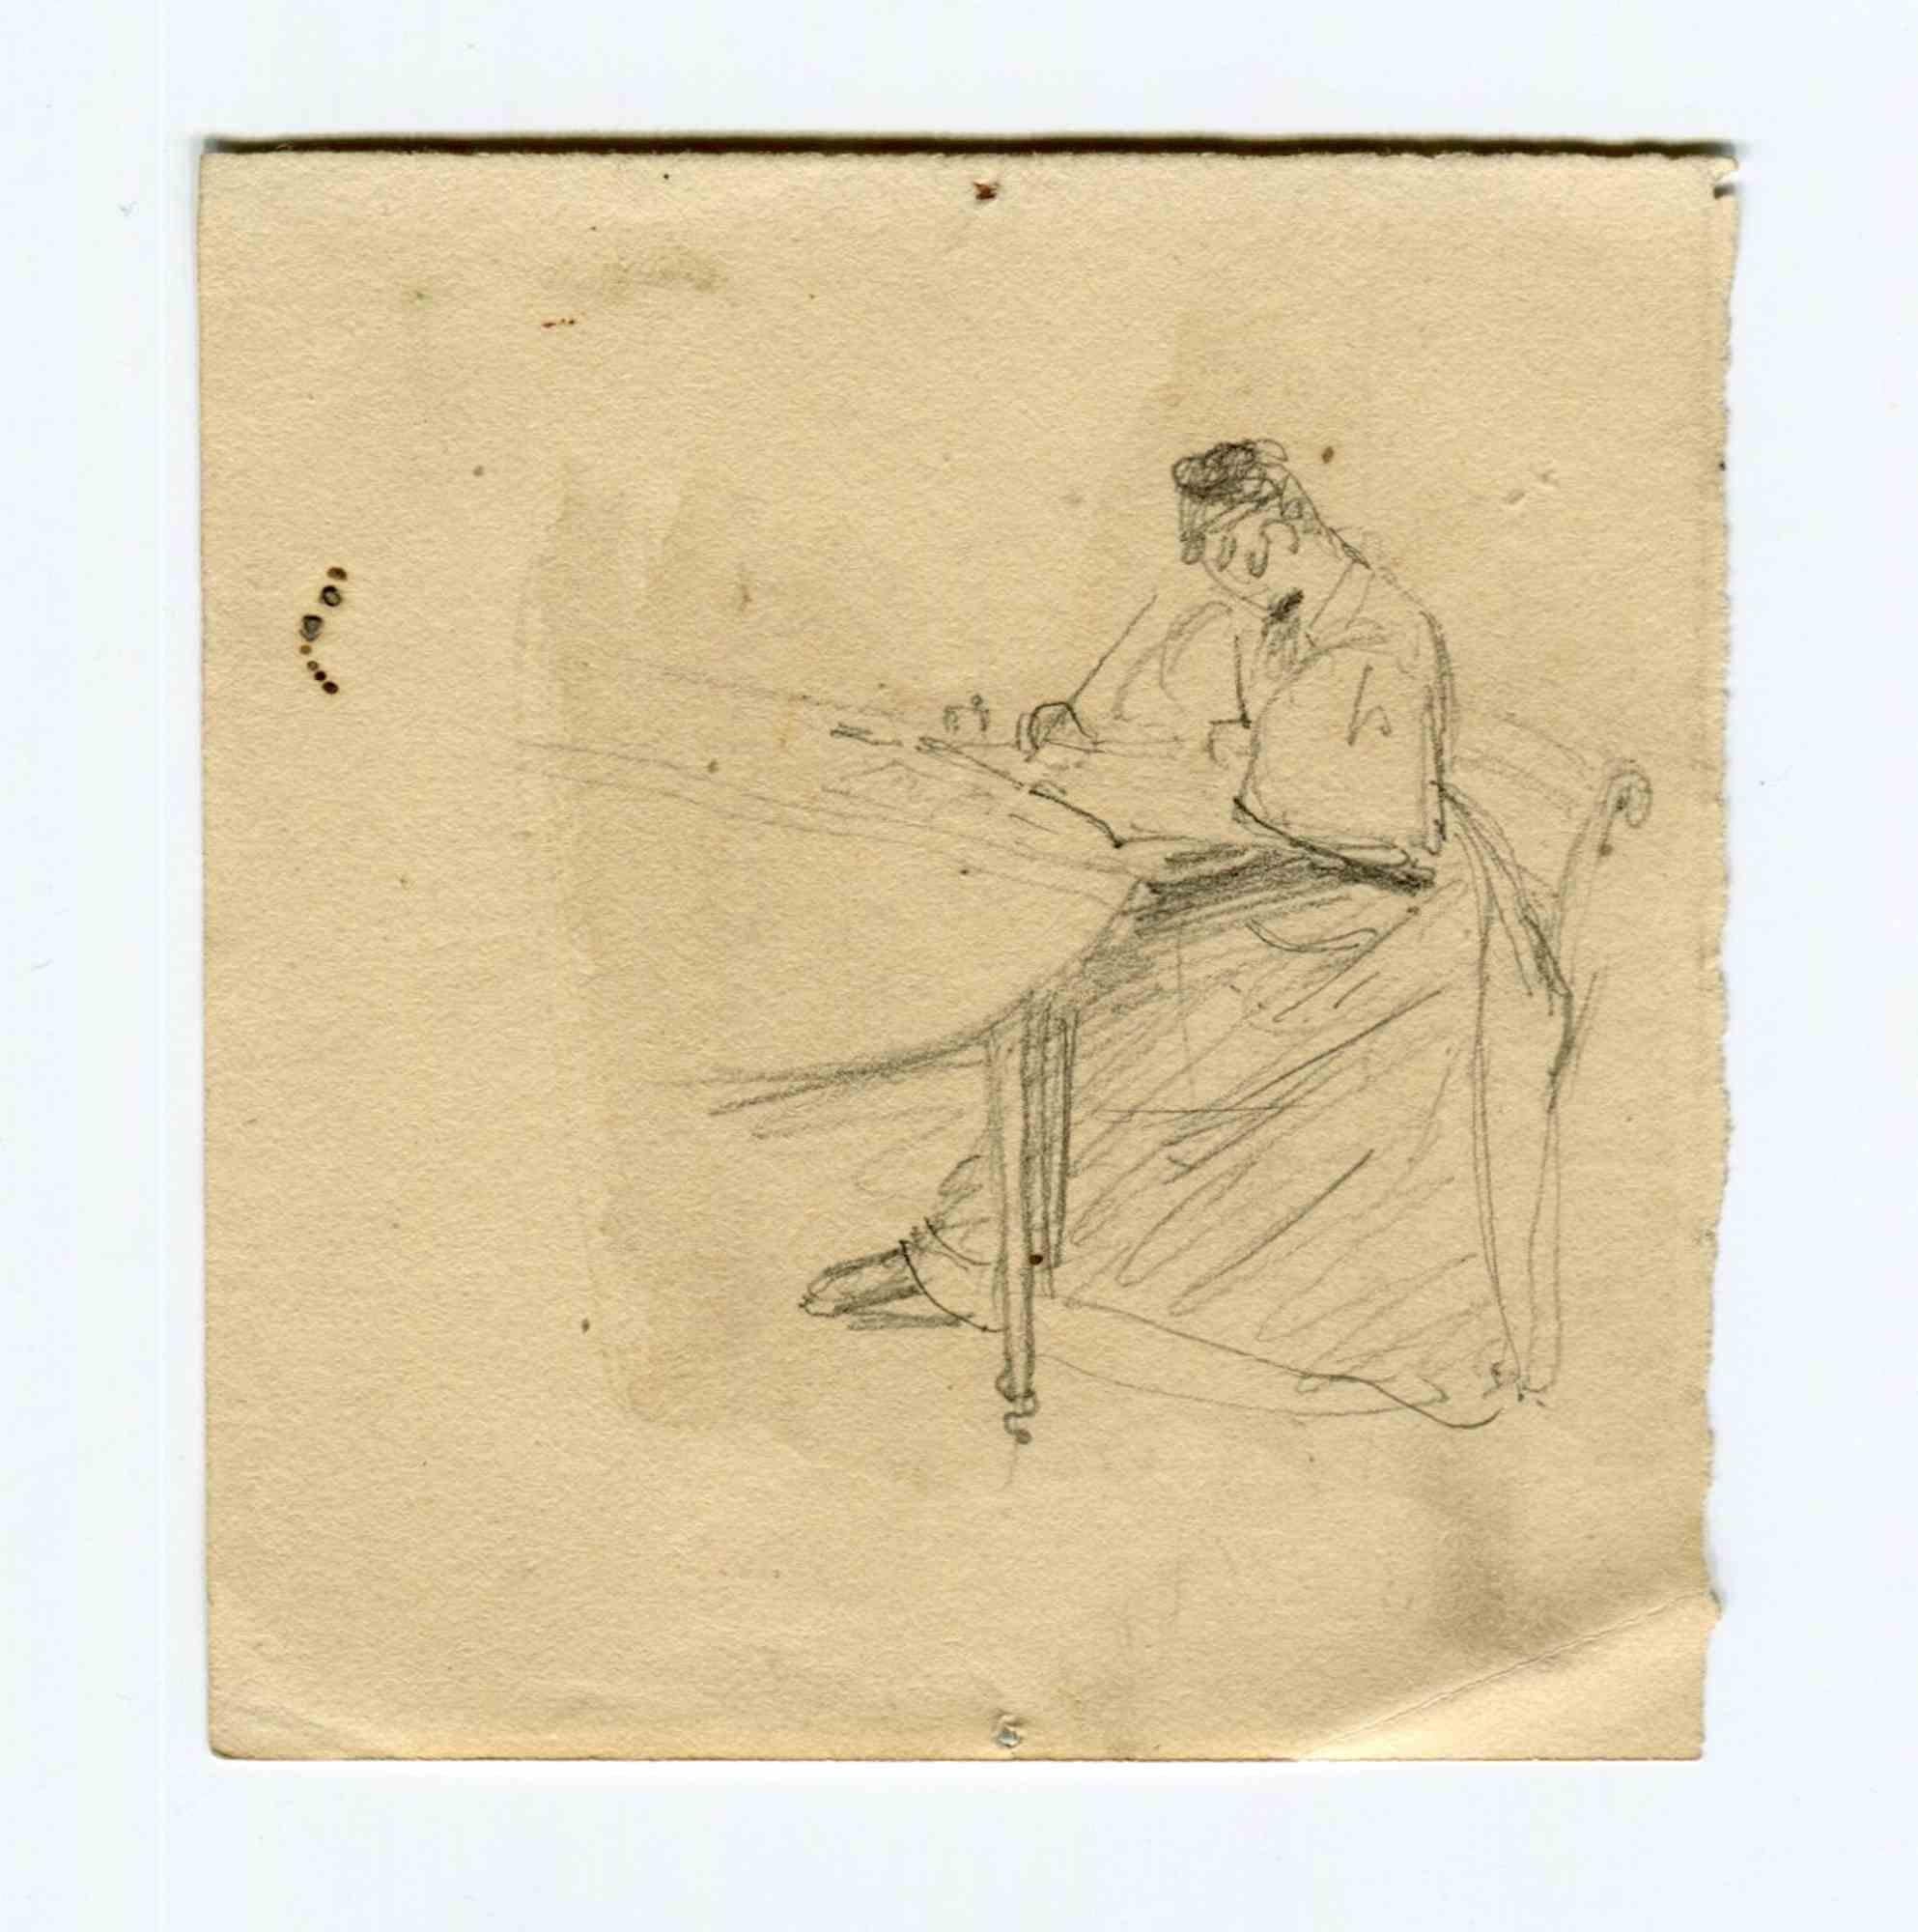 Unknown Figurative Art - Figure  - Original Drawing - Early 20th Century